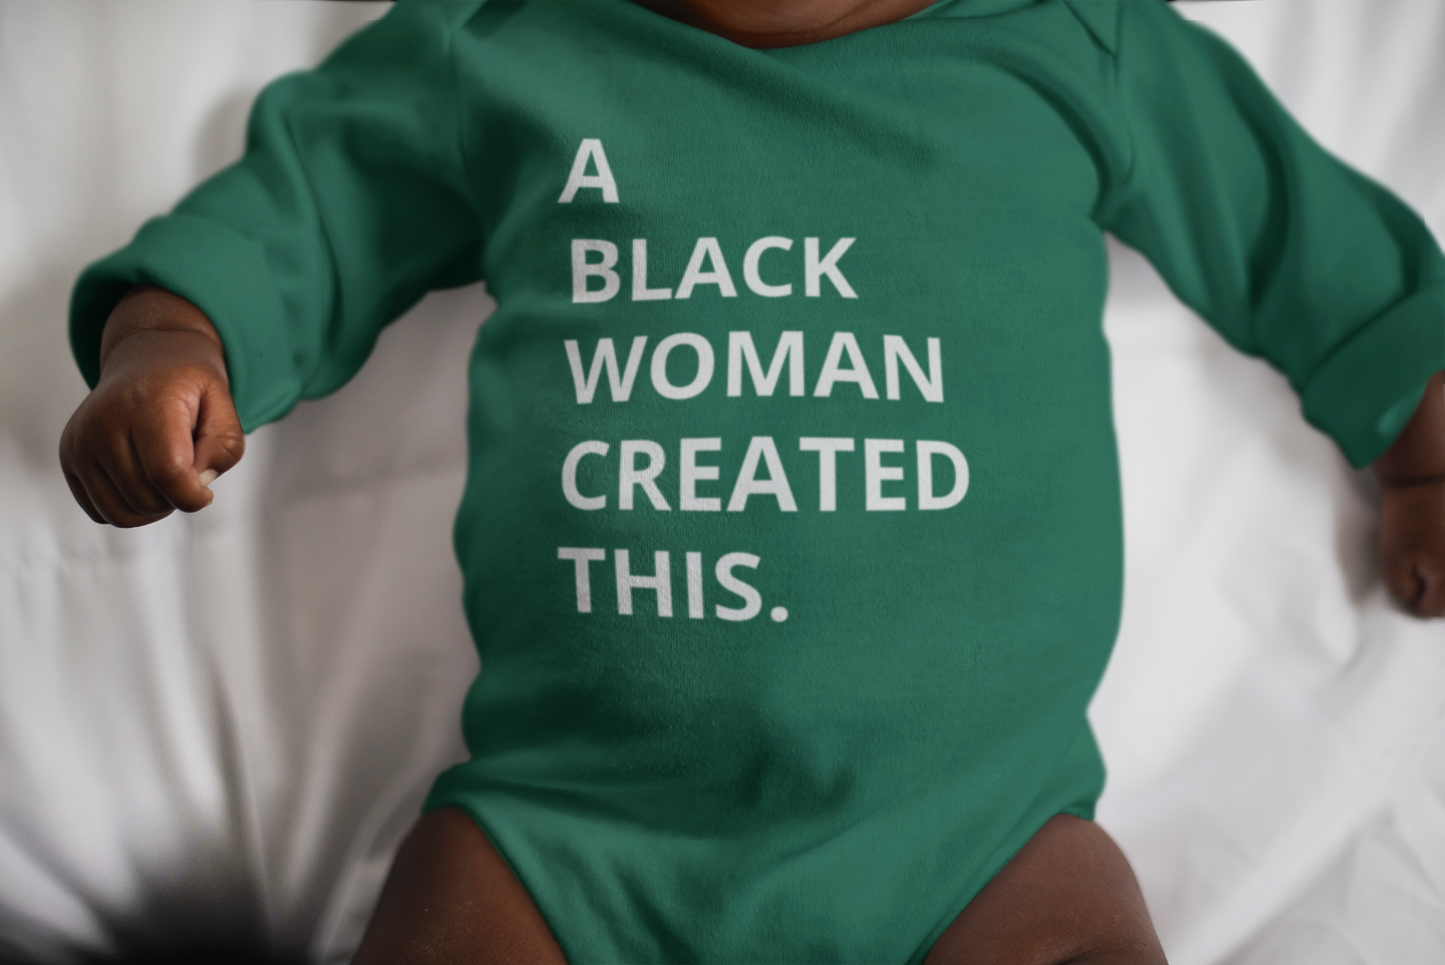 A Black Woman Created This. Long Sleeve Baby Onesie